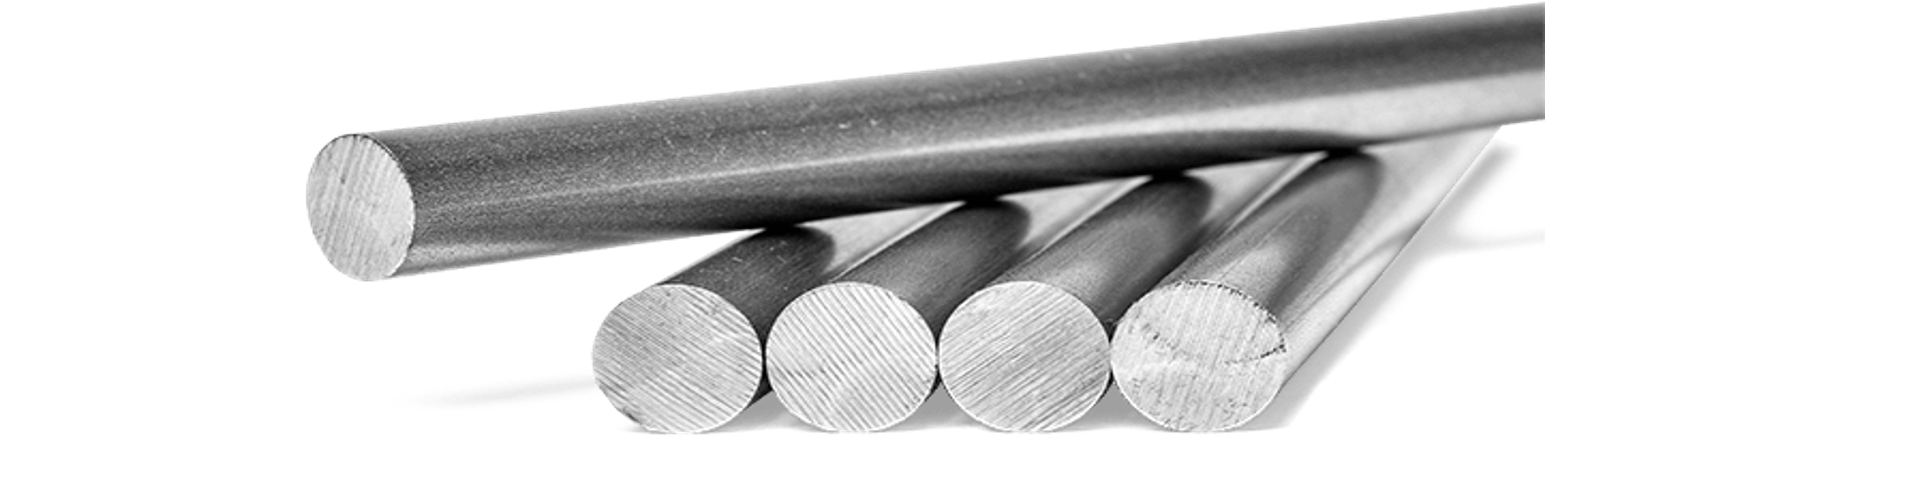 Stainless Steel 440A Round bars 